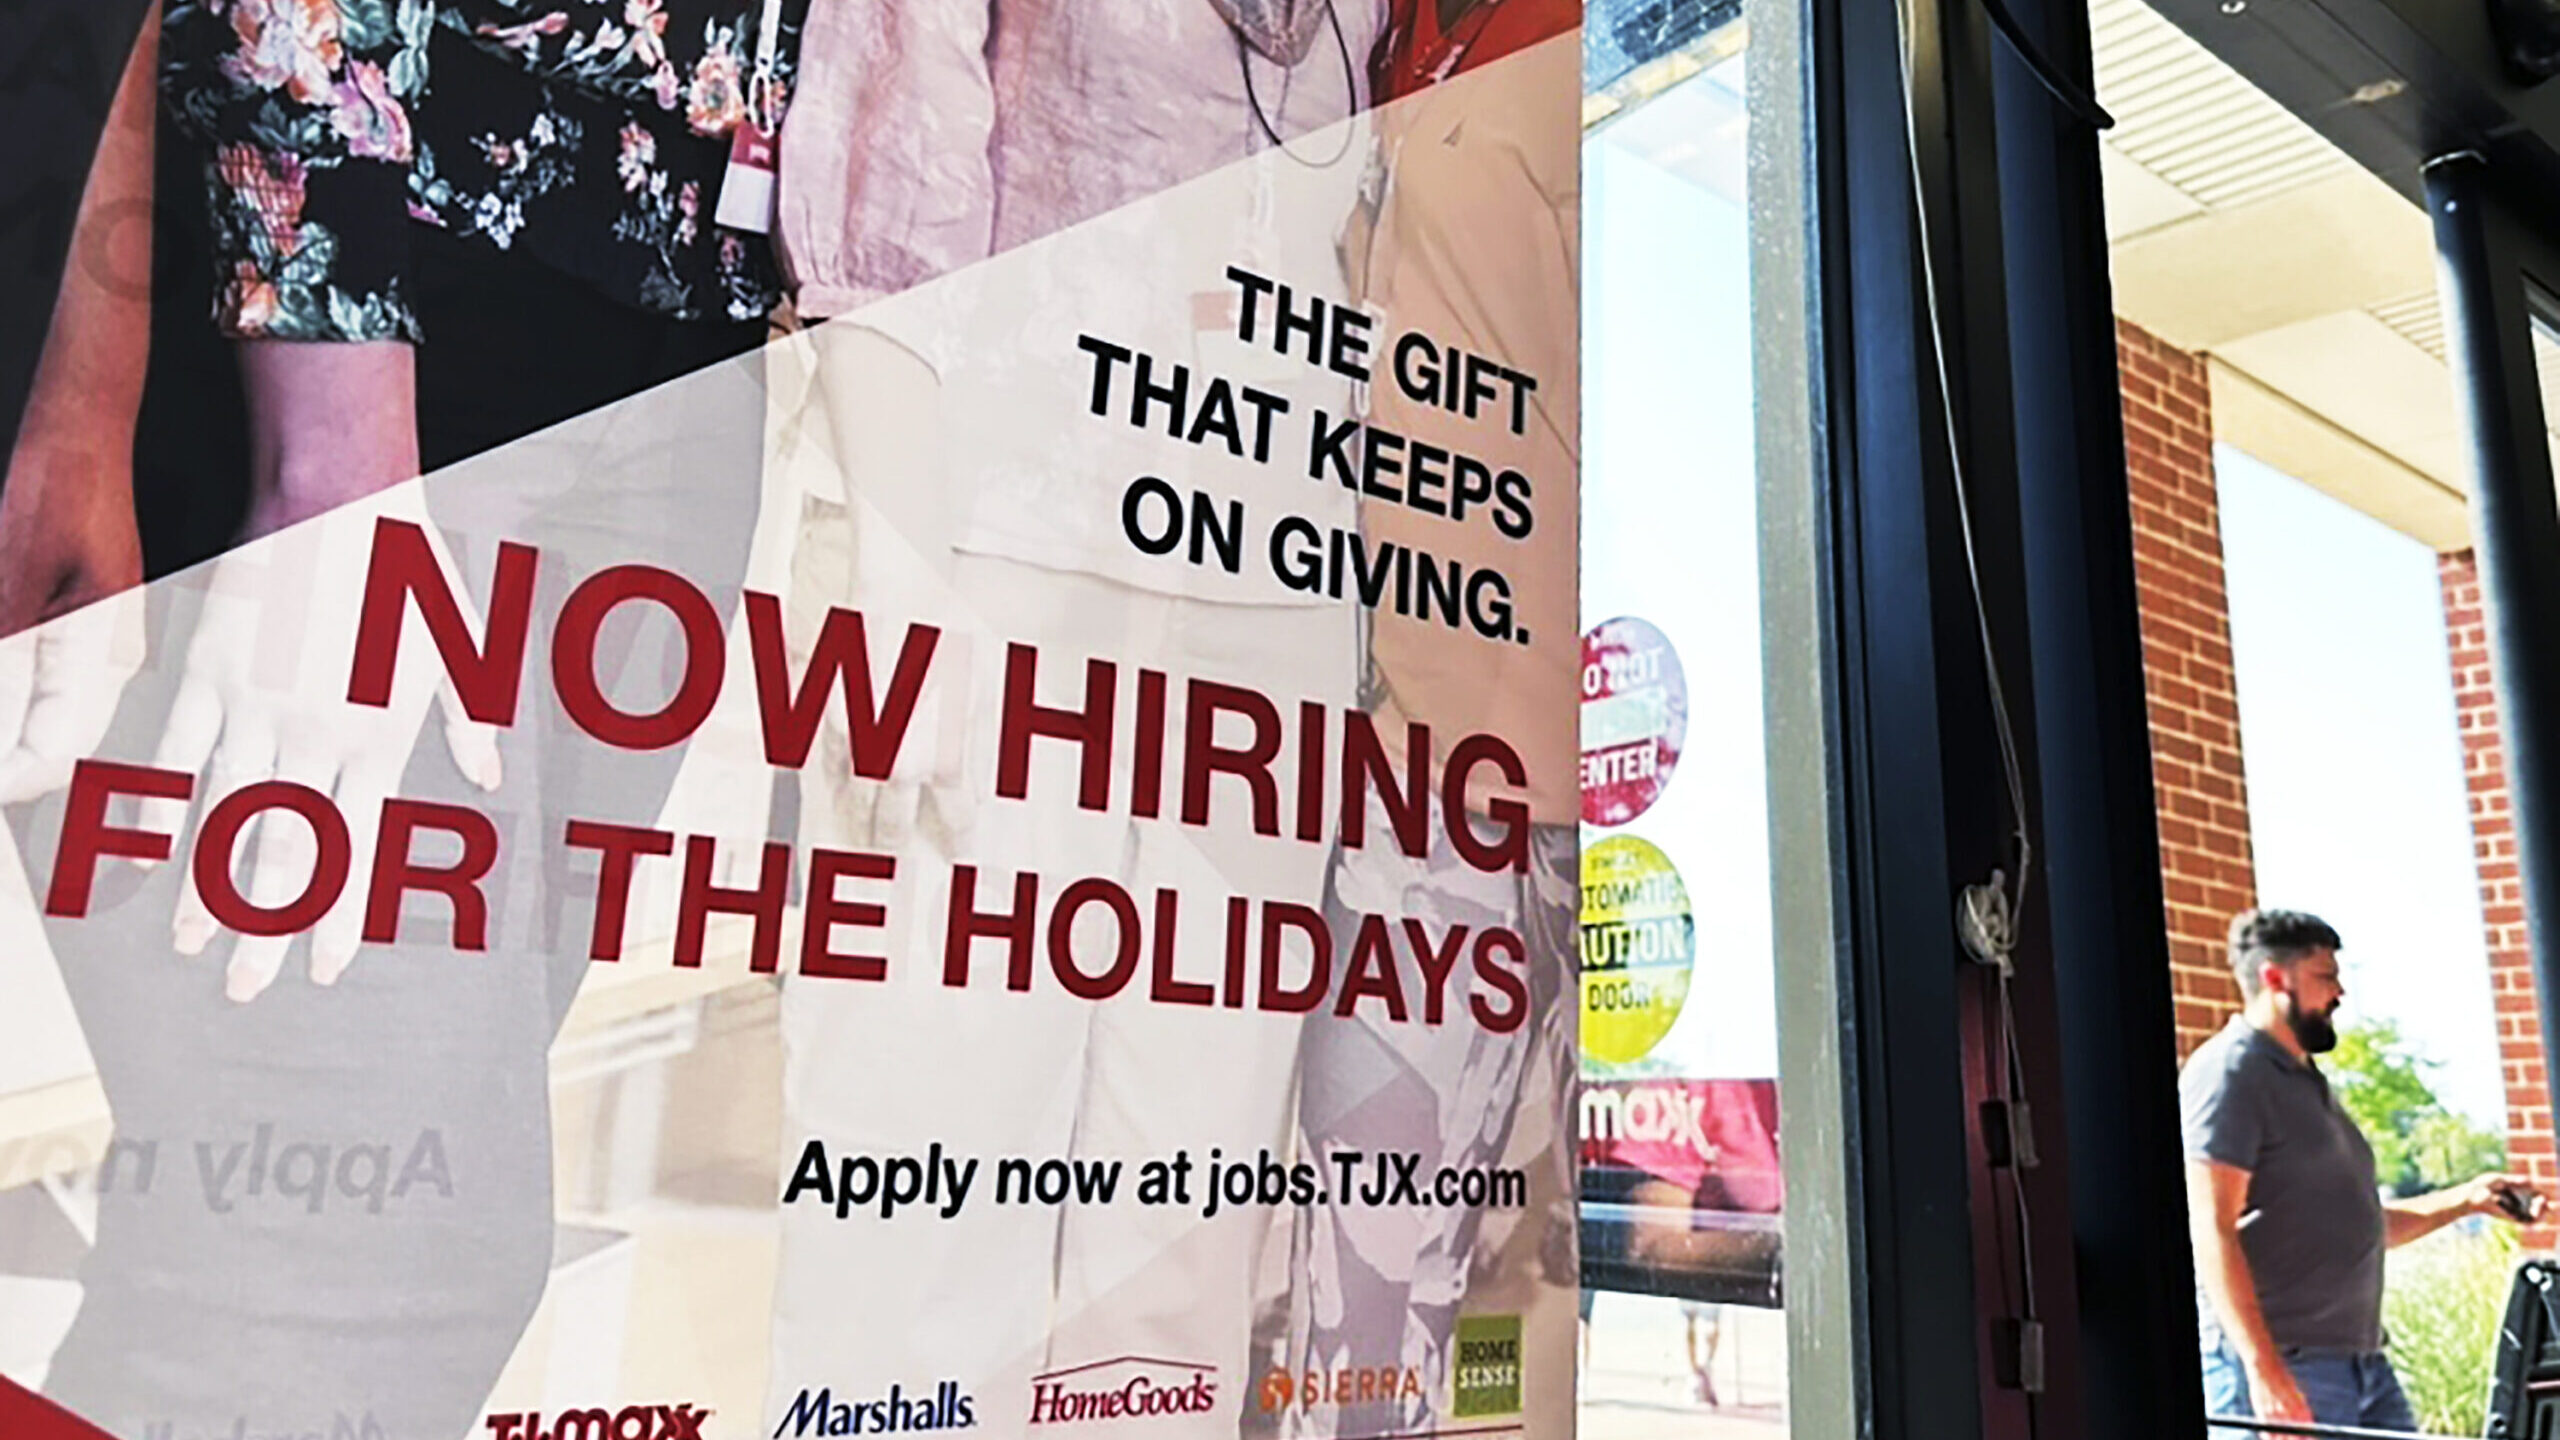 A hiring sign is displayed at a retail store in Vernon Hills, Ill. A new study shows most people li...